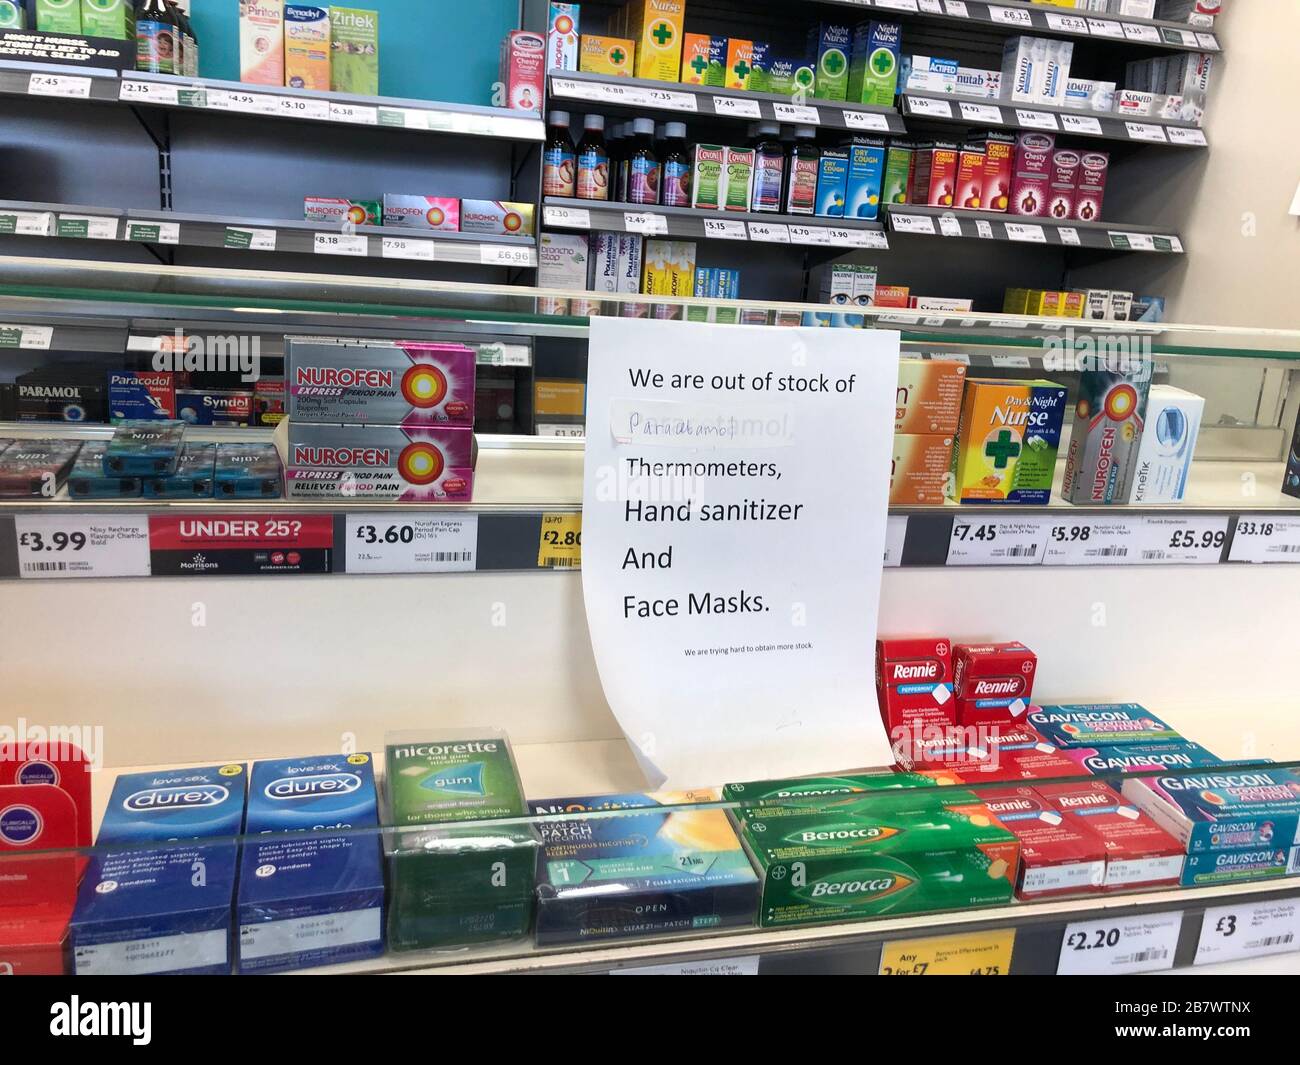 A sign at a Morrisons supermarket in Whitley Bay in North East England informing customers of out of stock items as the death toll from coronavirus in the UK reached 71 people. Stock Photo